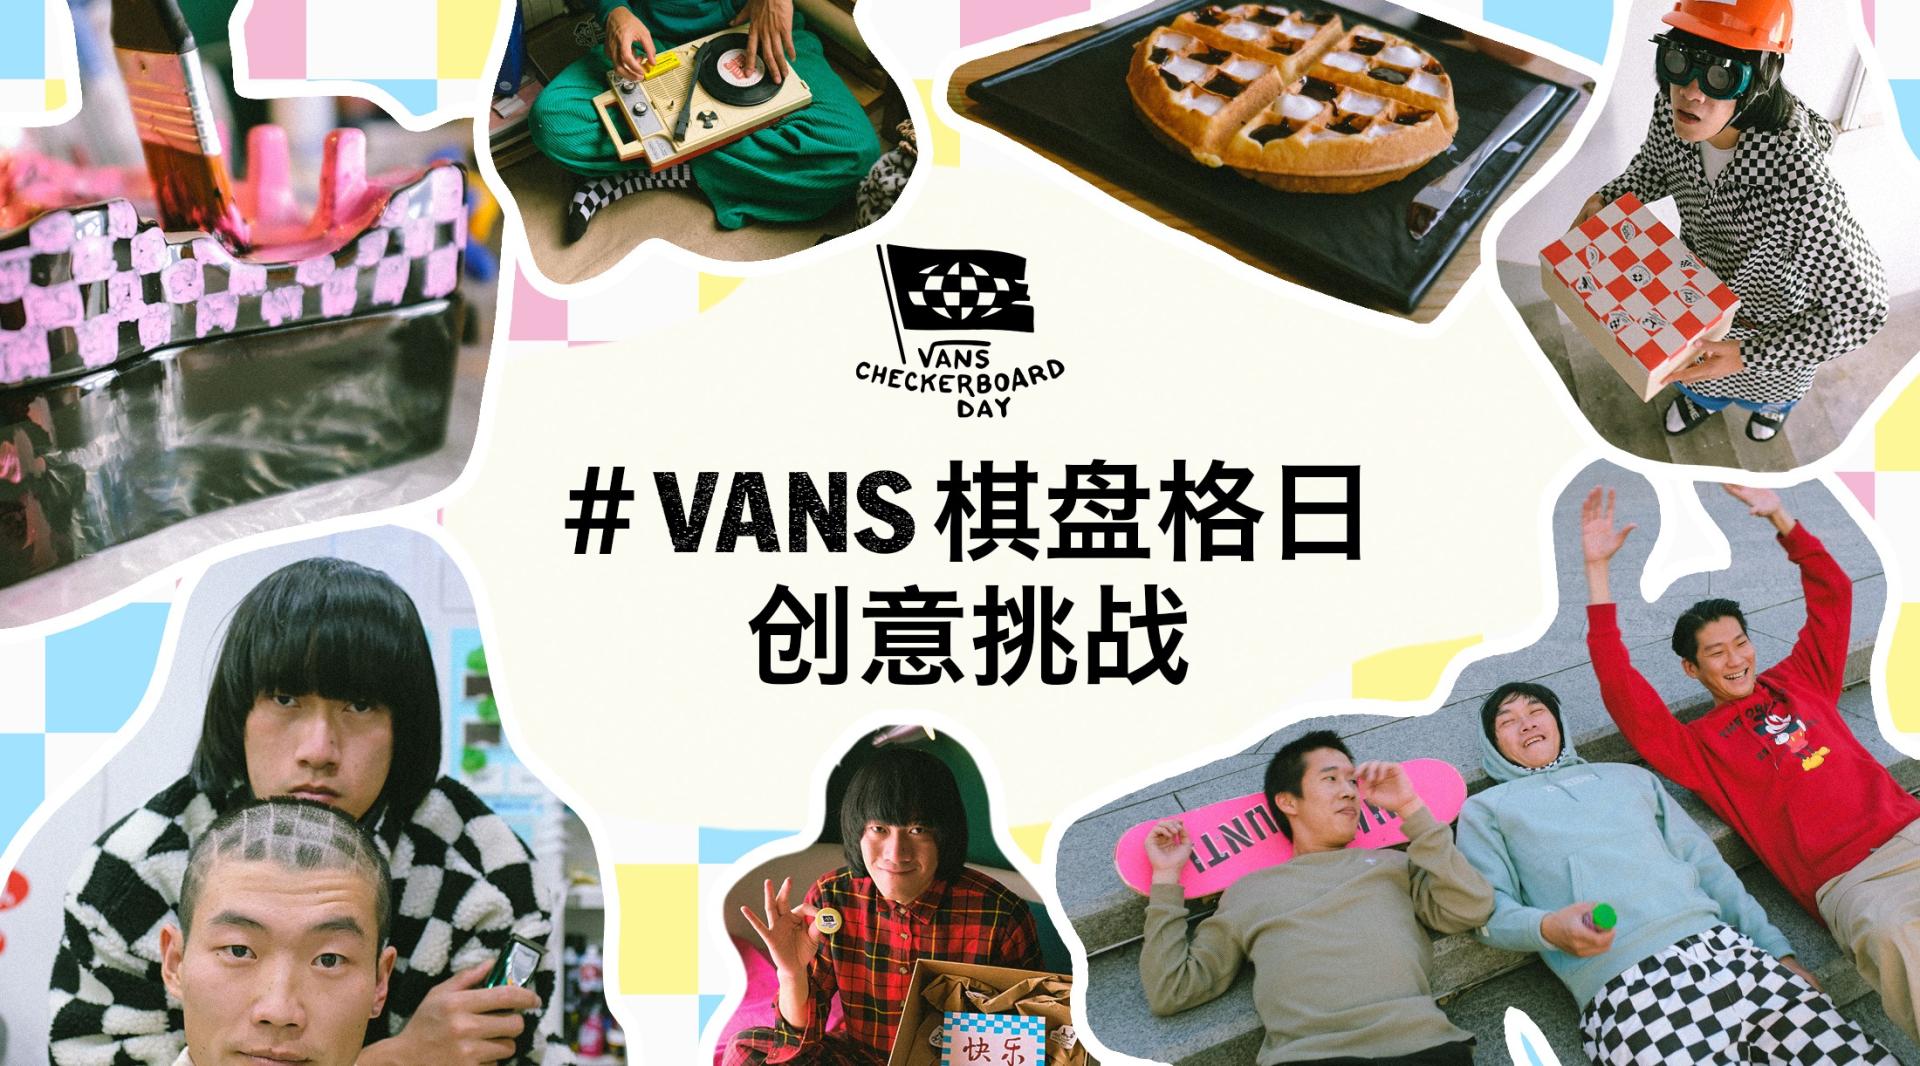 VANS 棋盘格日 Call To Action短片